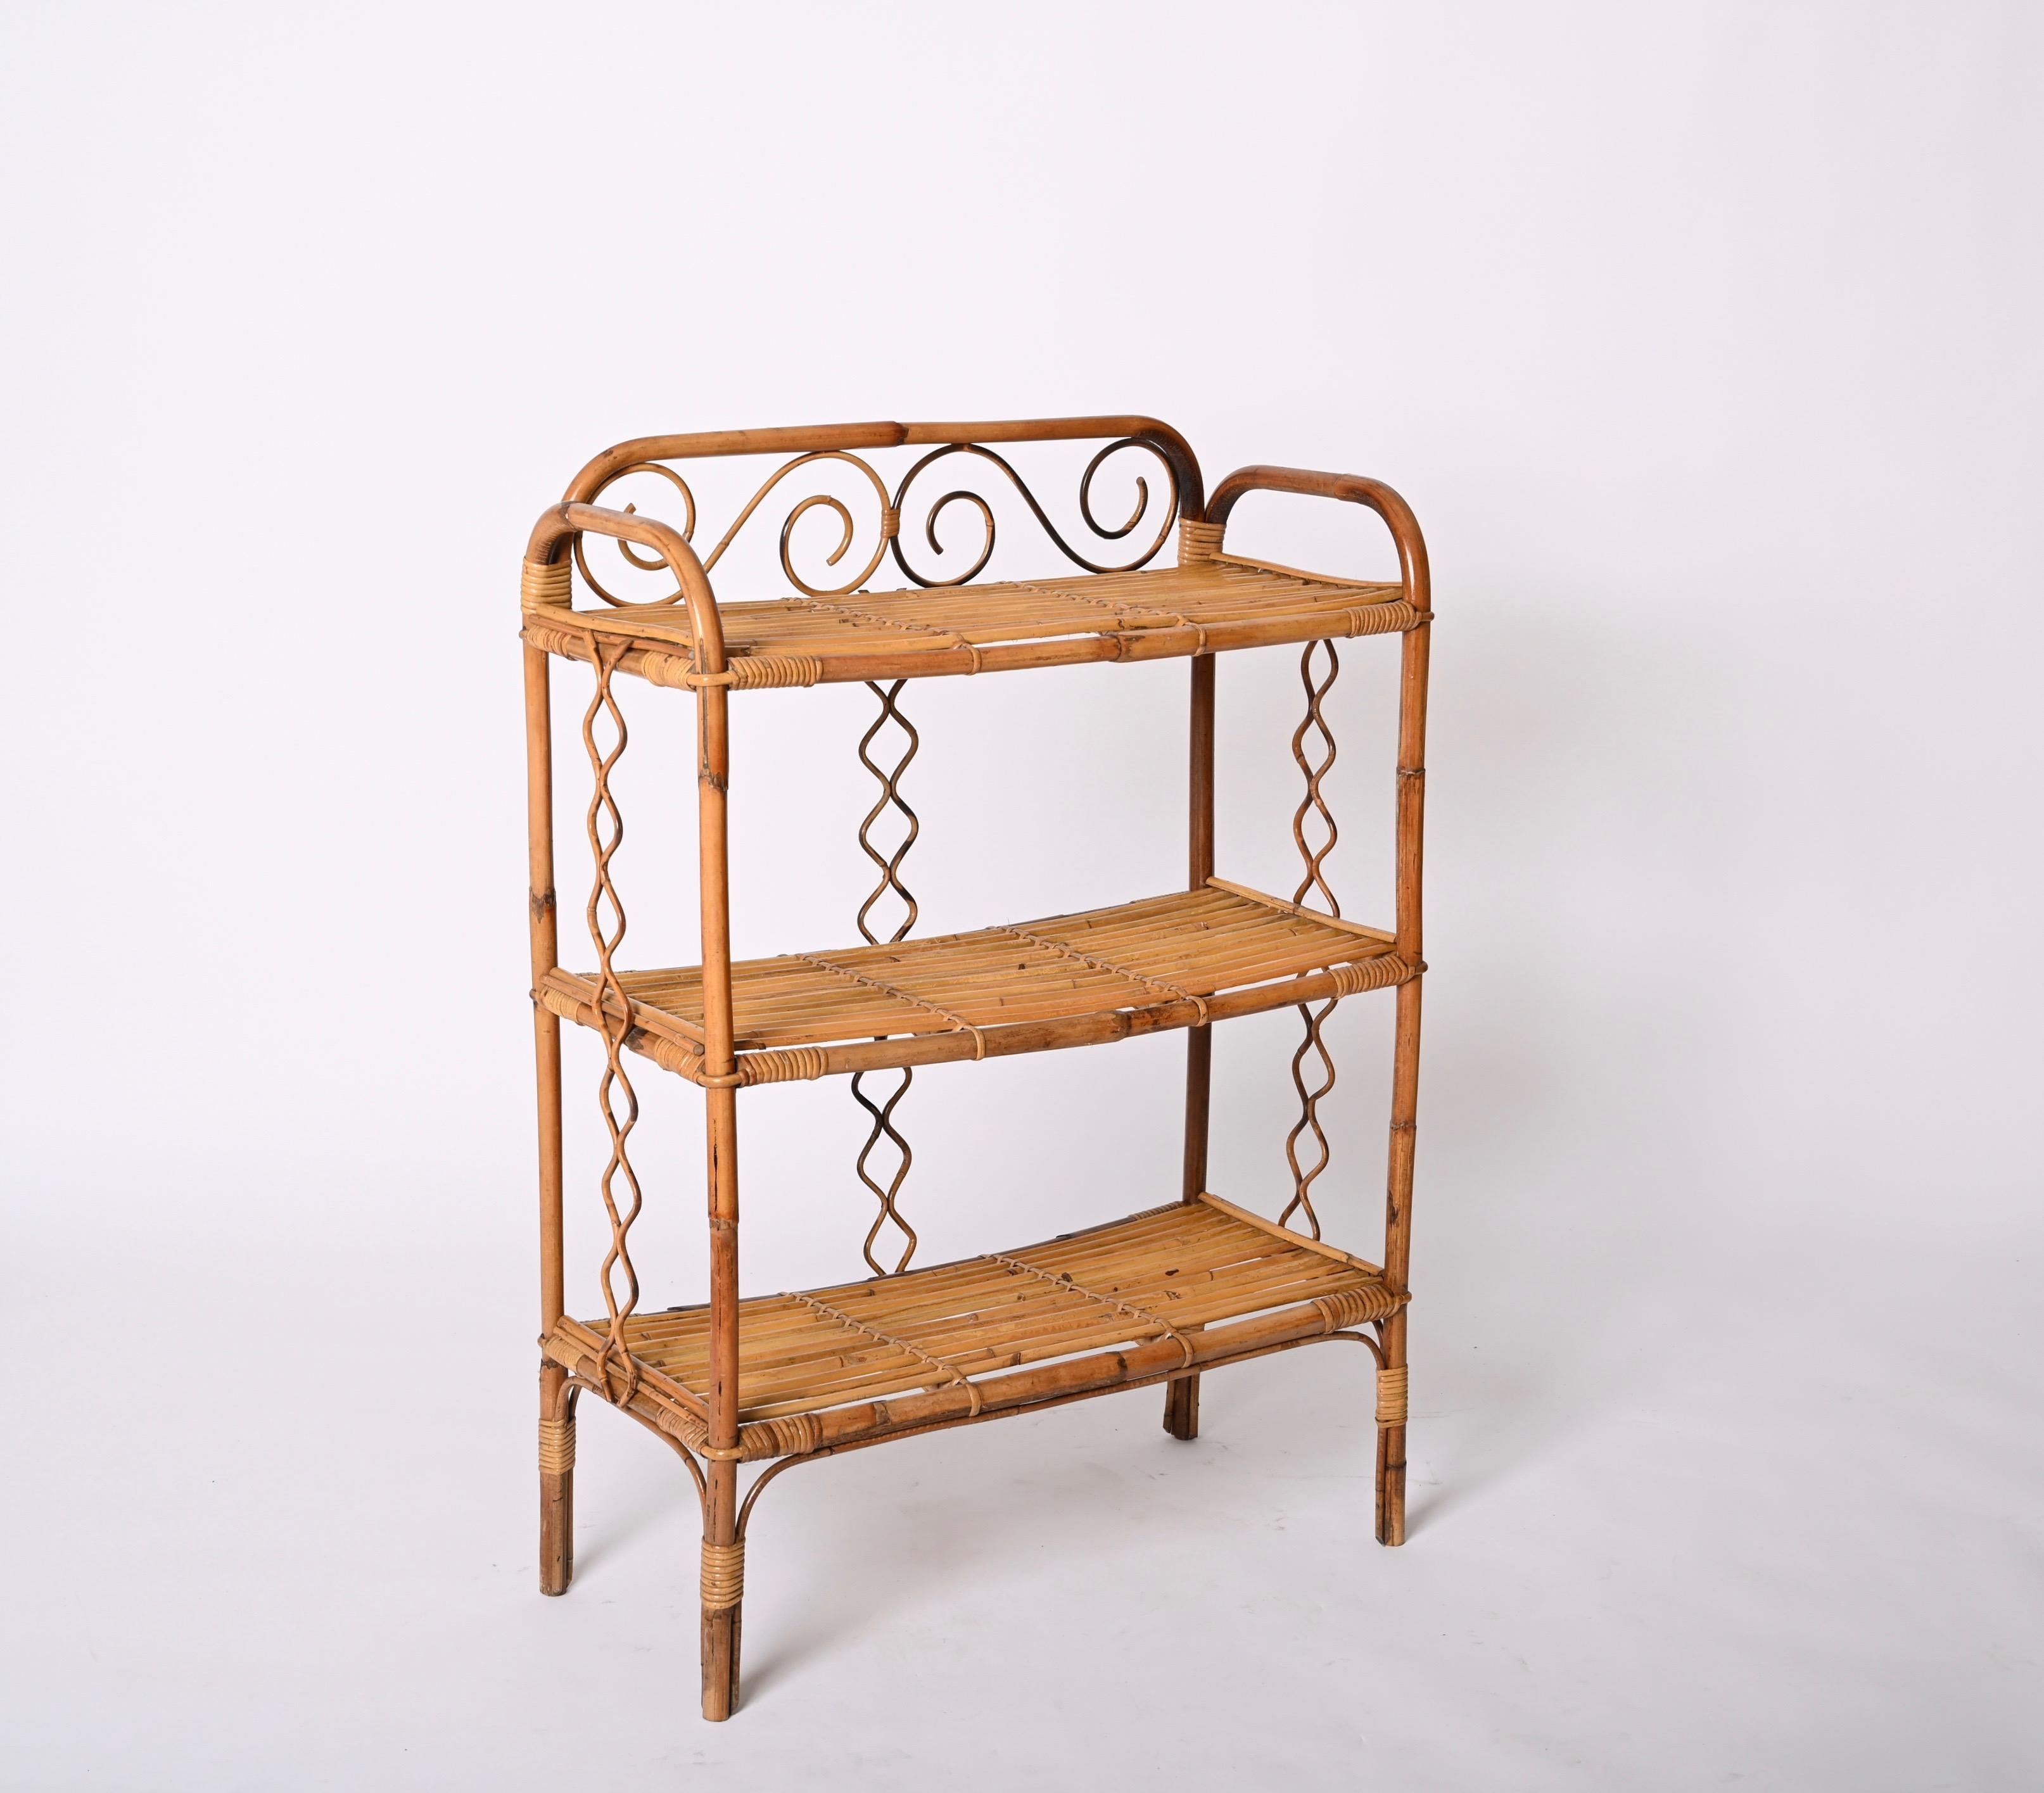 Midcentury Étagère Bamboo and Rattan, Italian Bookcase with Three Shelves, 1970s For Sale 10